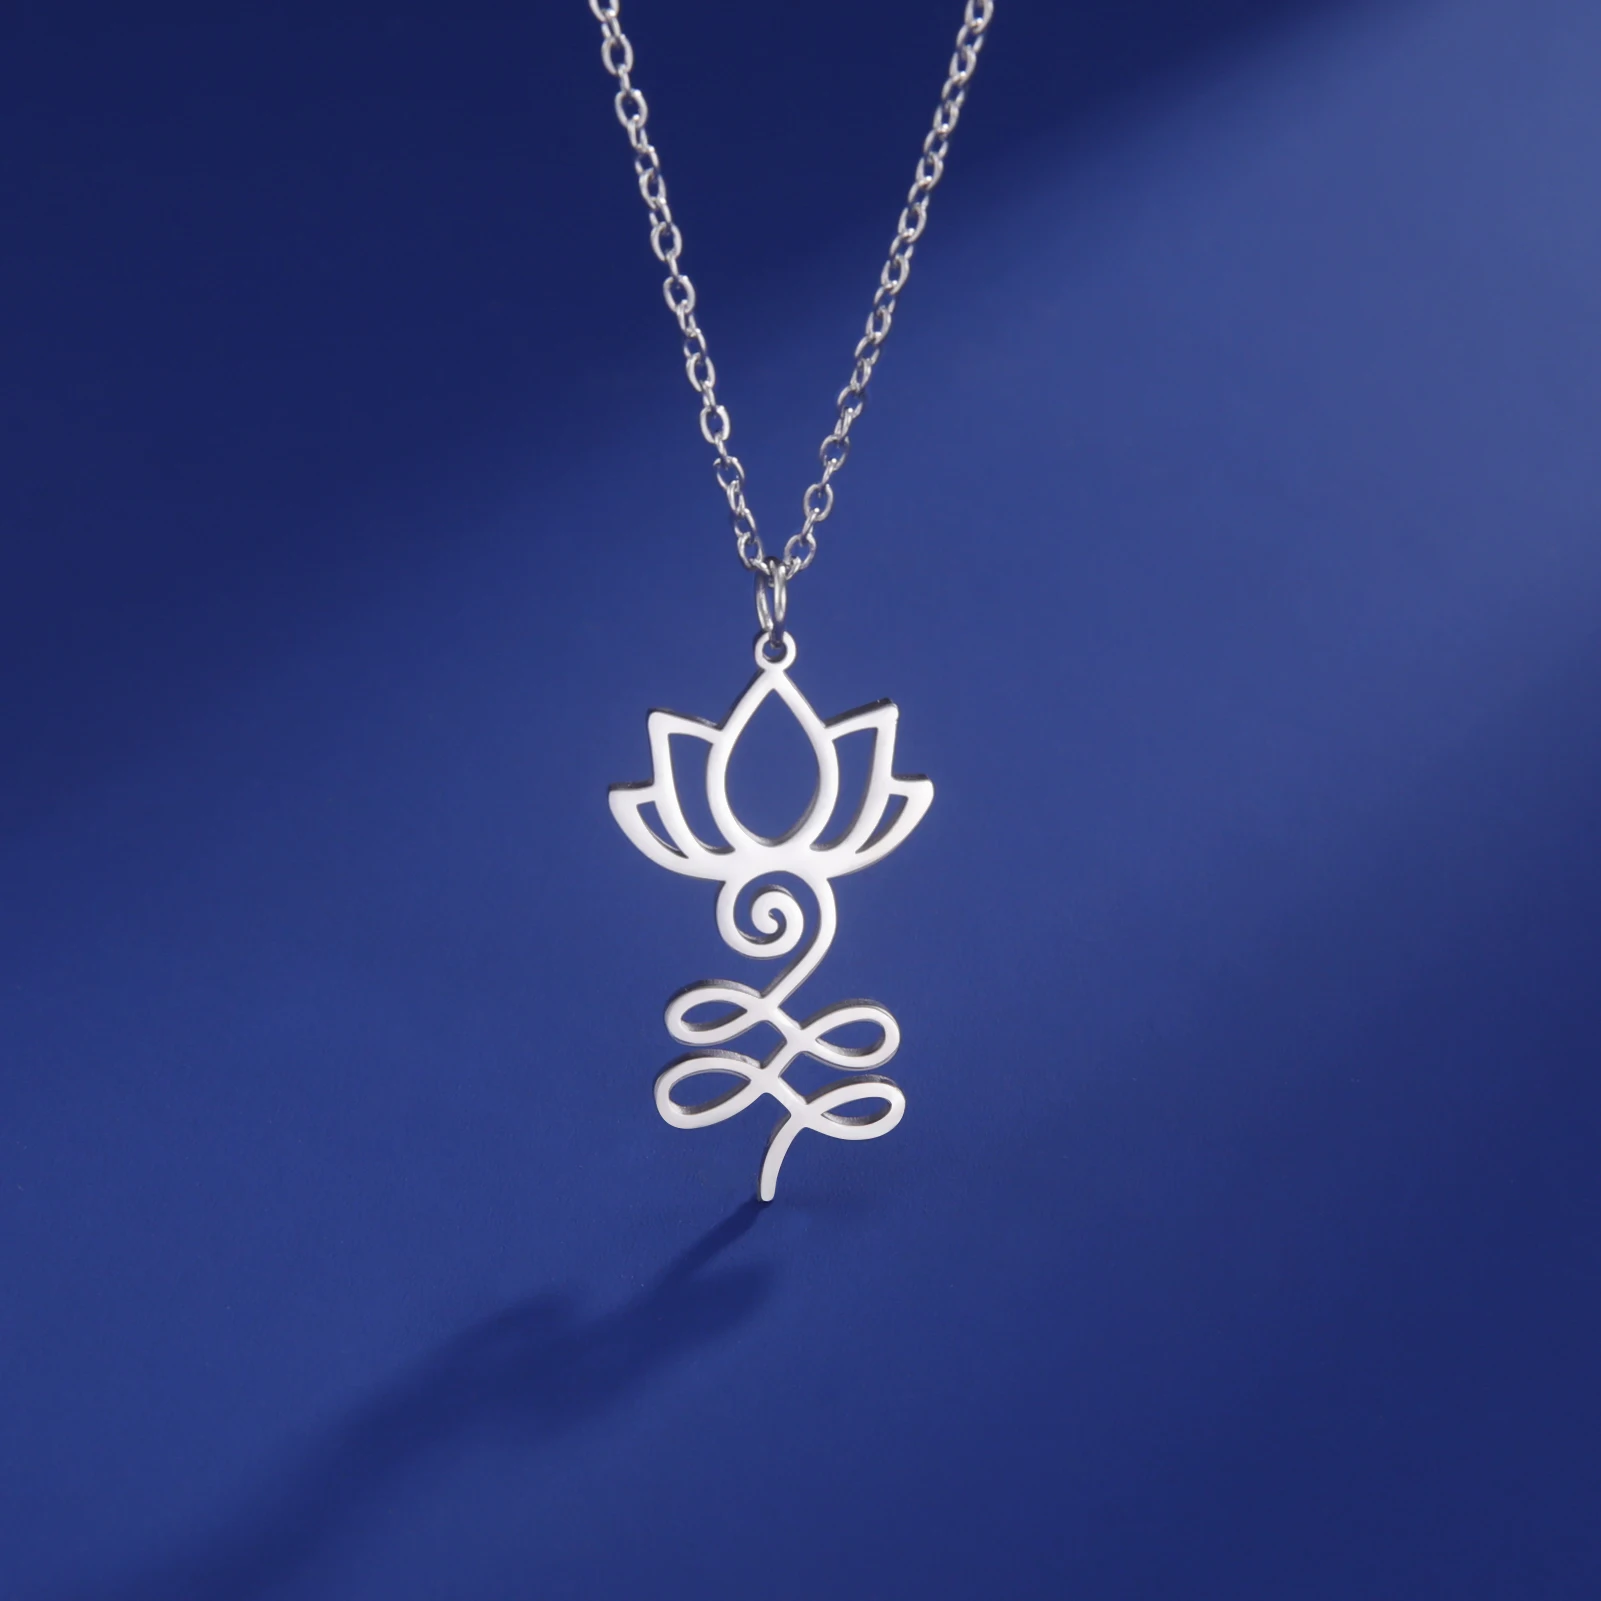 Skyrim Lotus Flower Yoga Om Unalome Pendant Necklace Stainless Steel Neck Chain for Women Buddhism Mandala Amulet Jewelry Gift